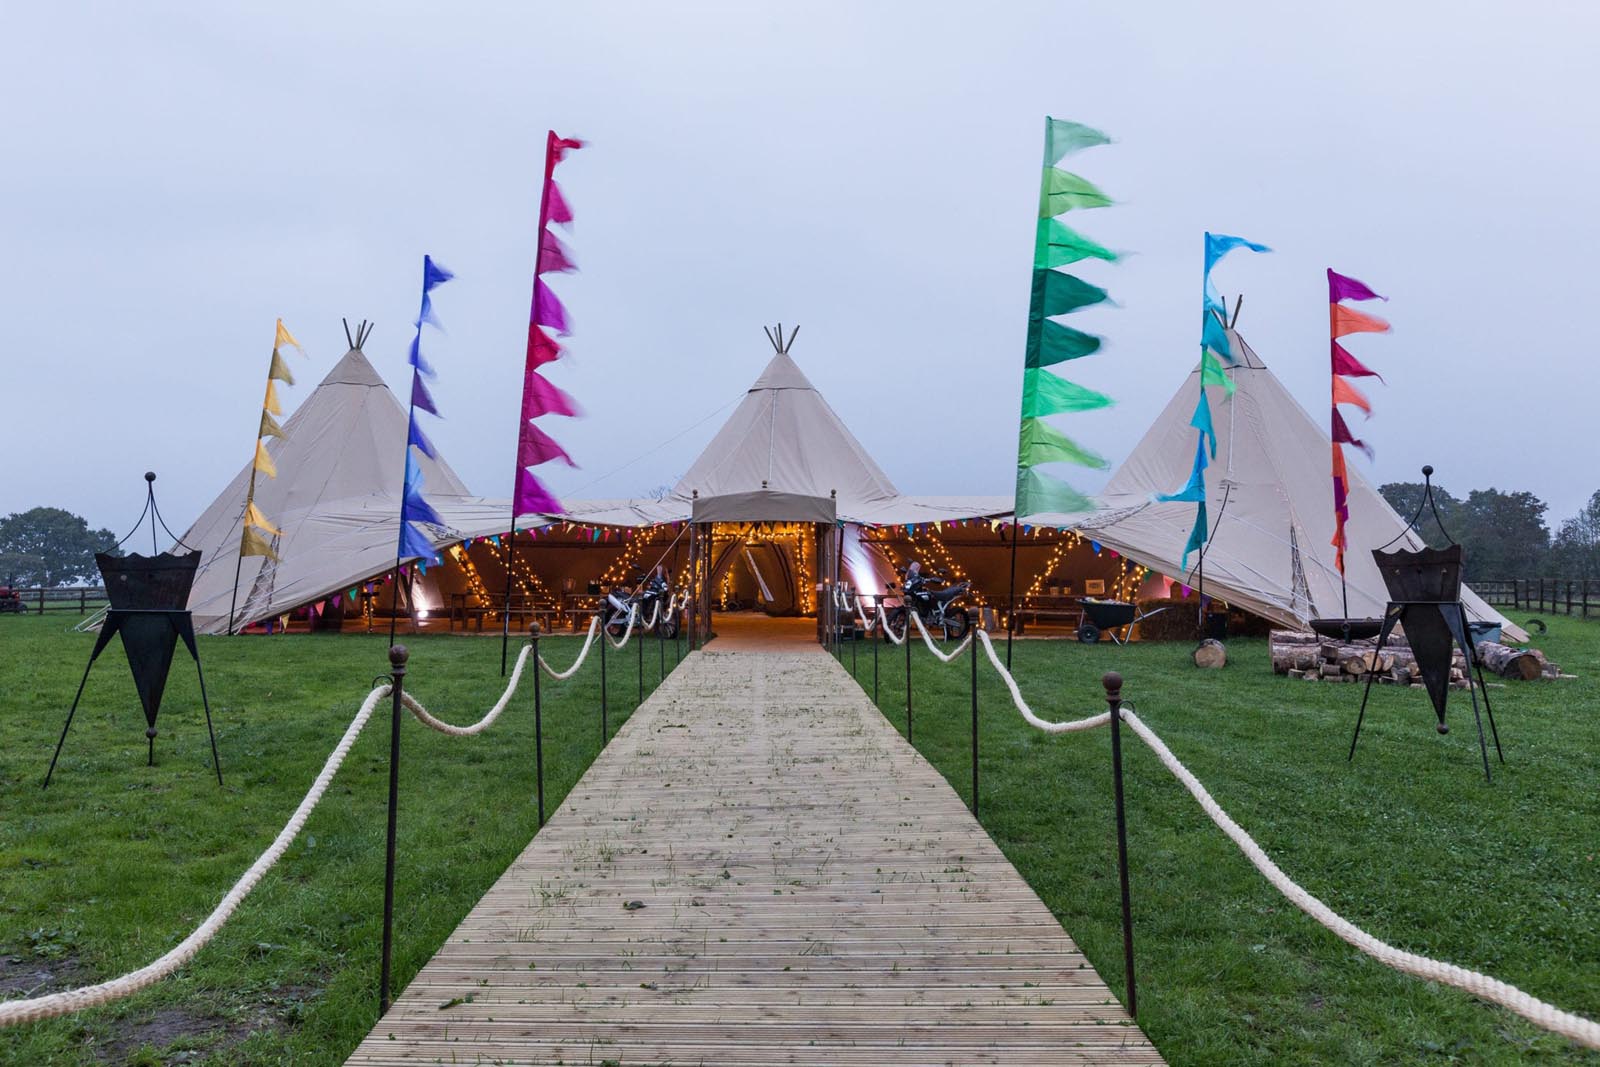 A large event tipi set up on The Great Lawn at Farnham Castle